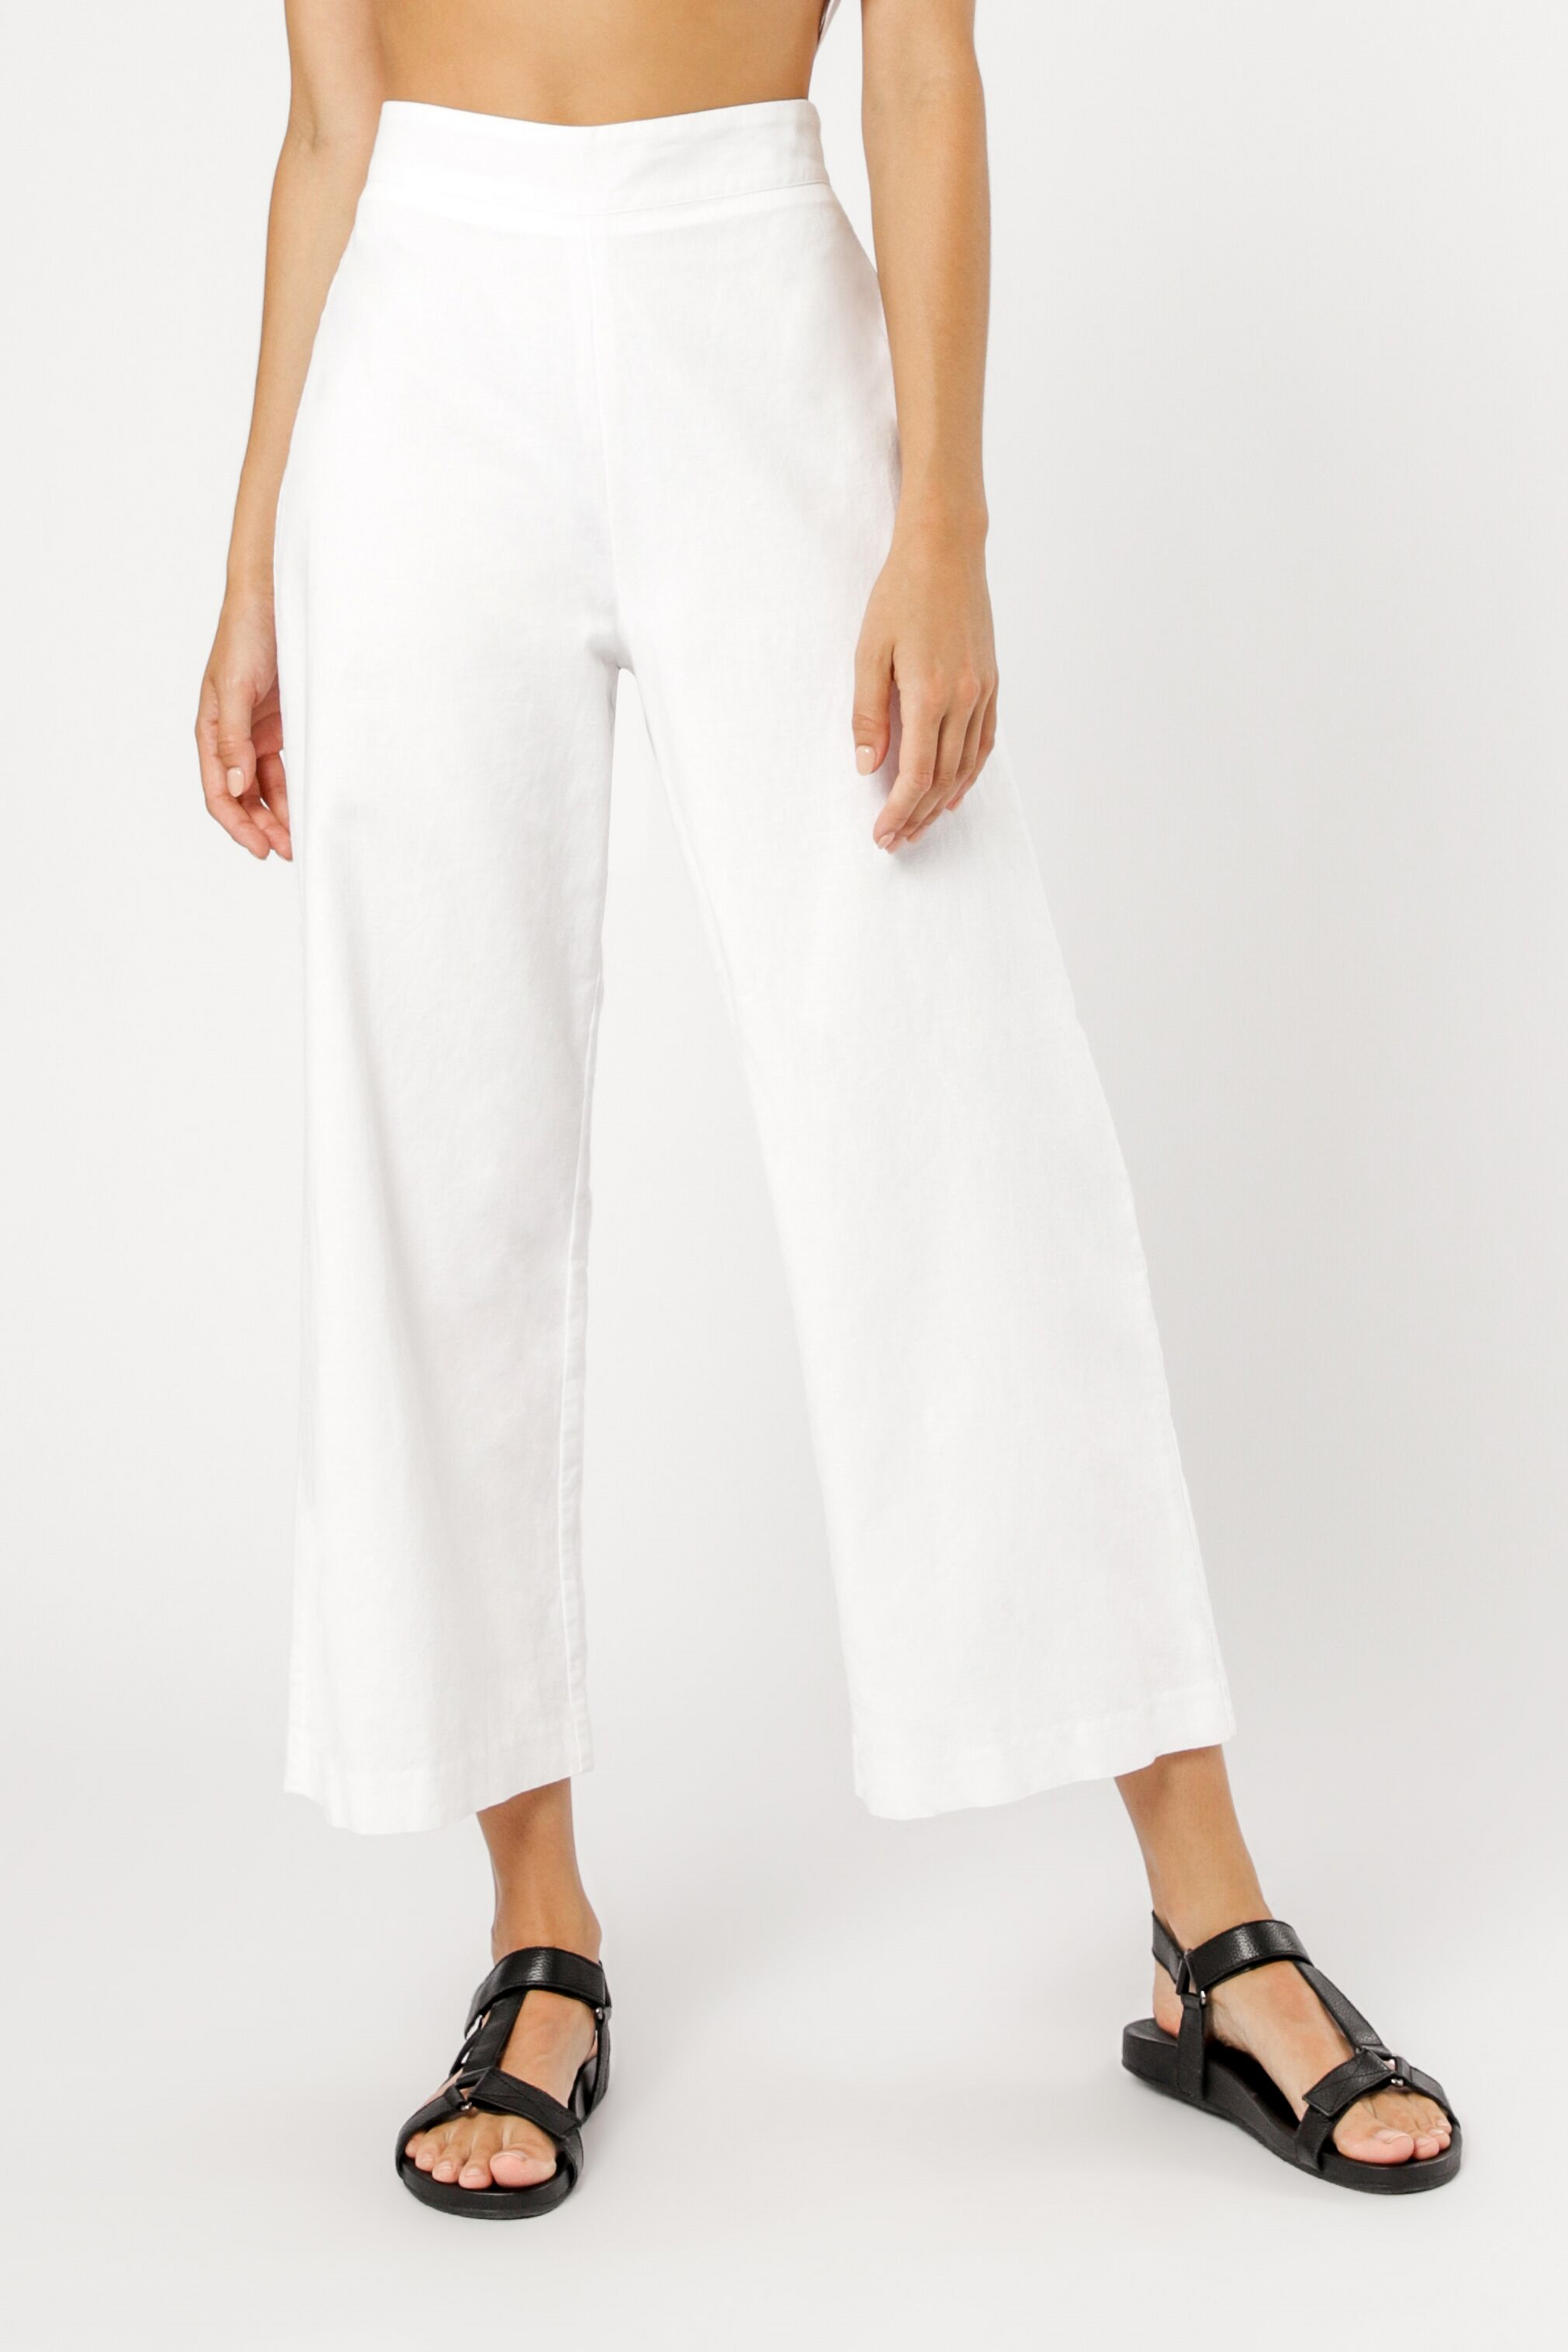 Nude Lucy selma wide leg pant white pants